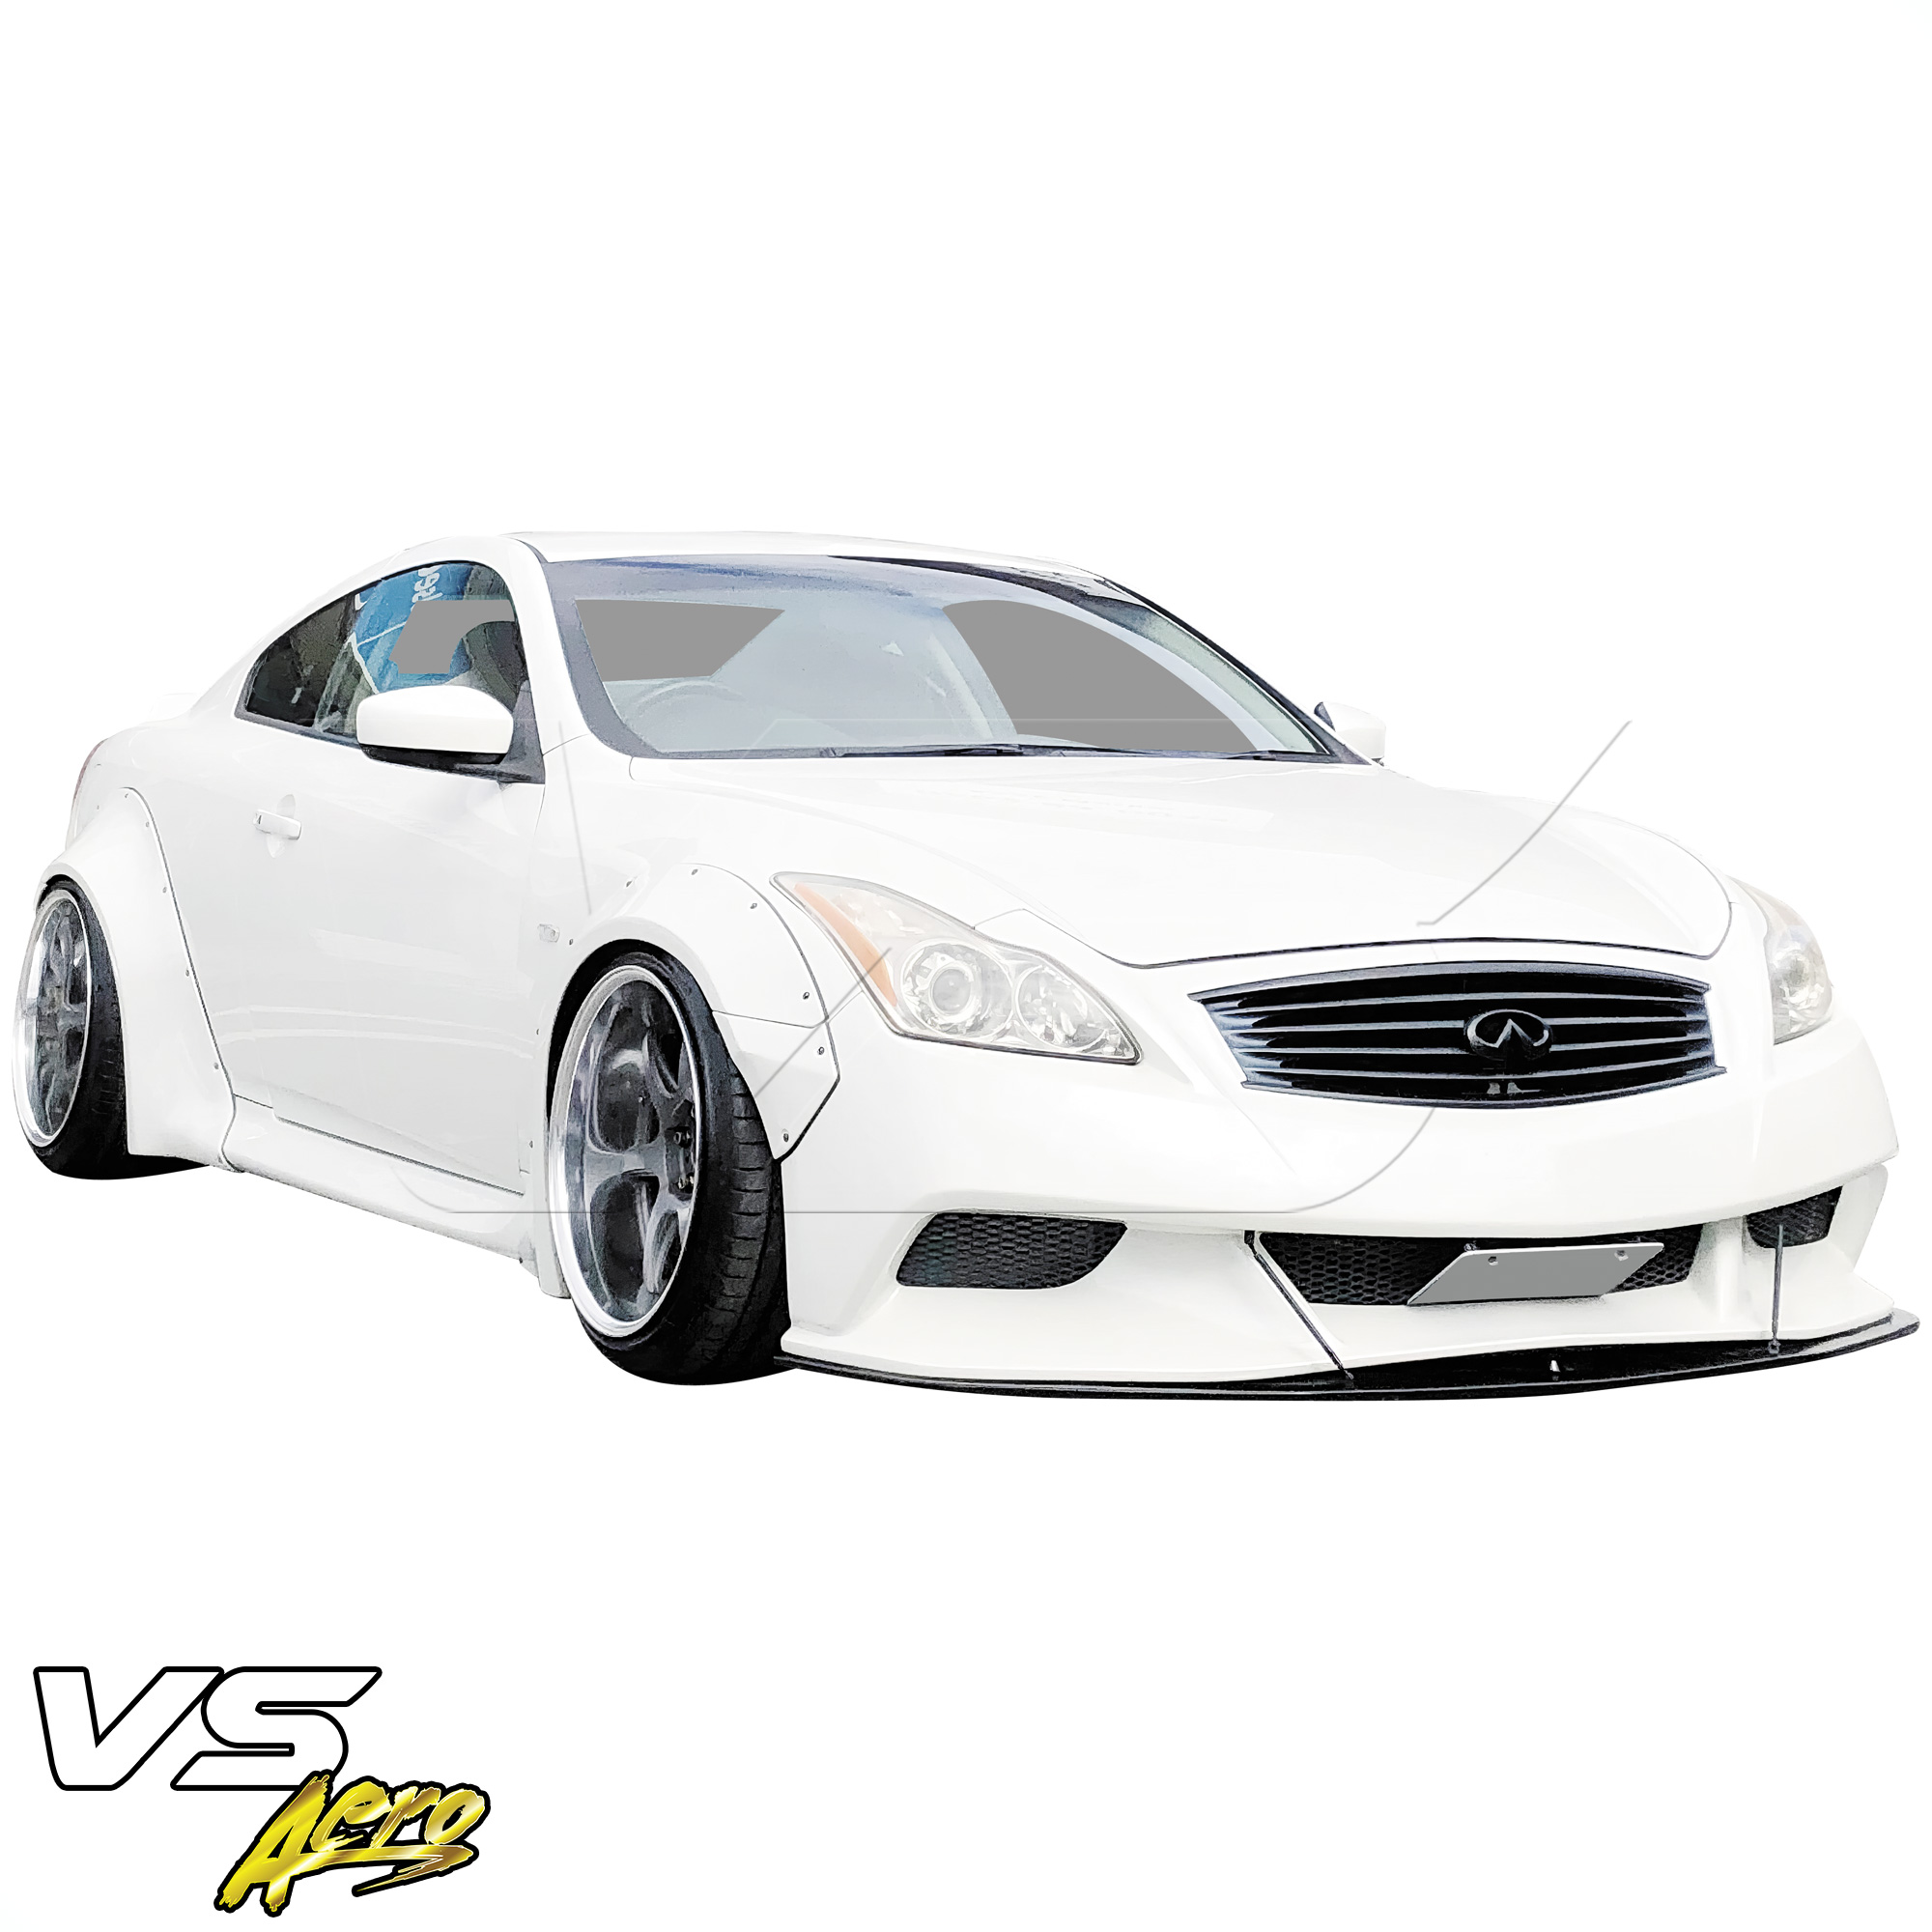 VSaero FRP LBPE Wide Body Fender Flares (front) 4pc > Infiniti G37 Coupe 2008-2015 > 2dr Coupe - Image 35